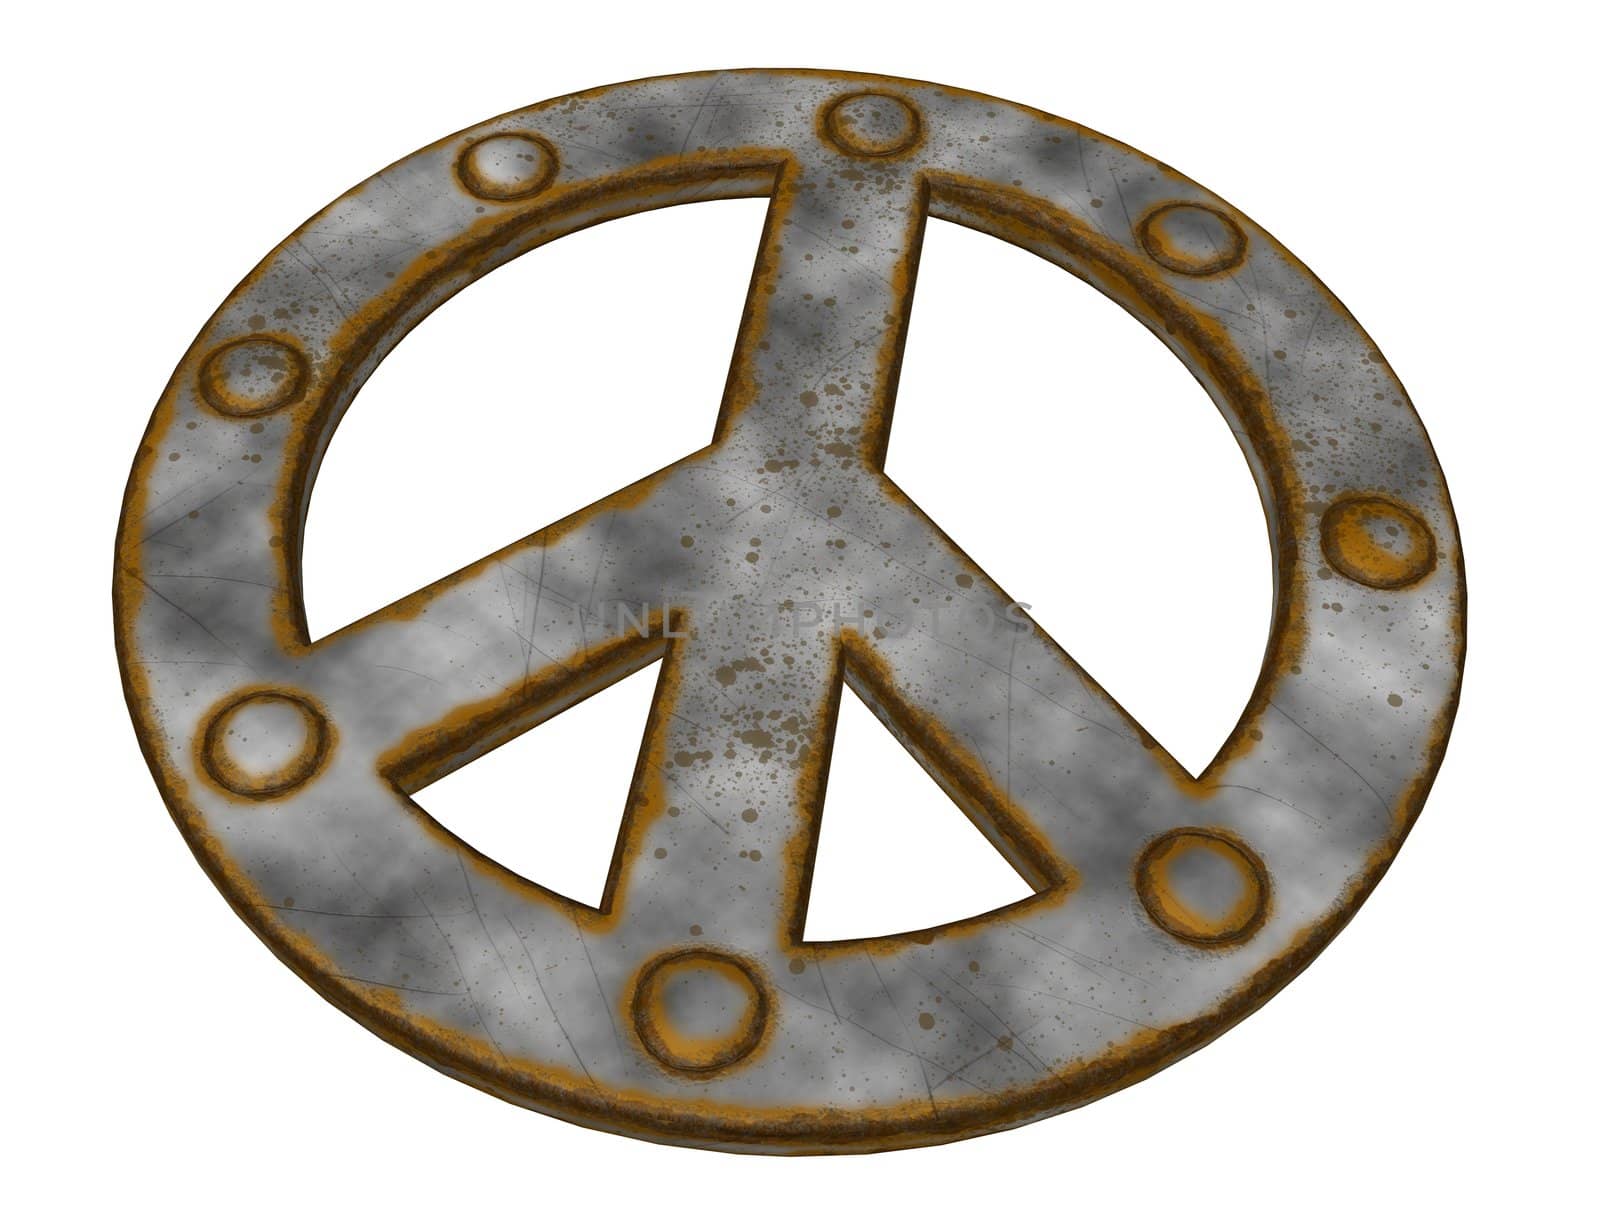 rusted riveted pacific symbol on white background - 3d illustration